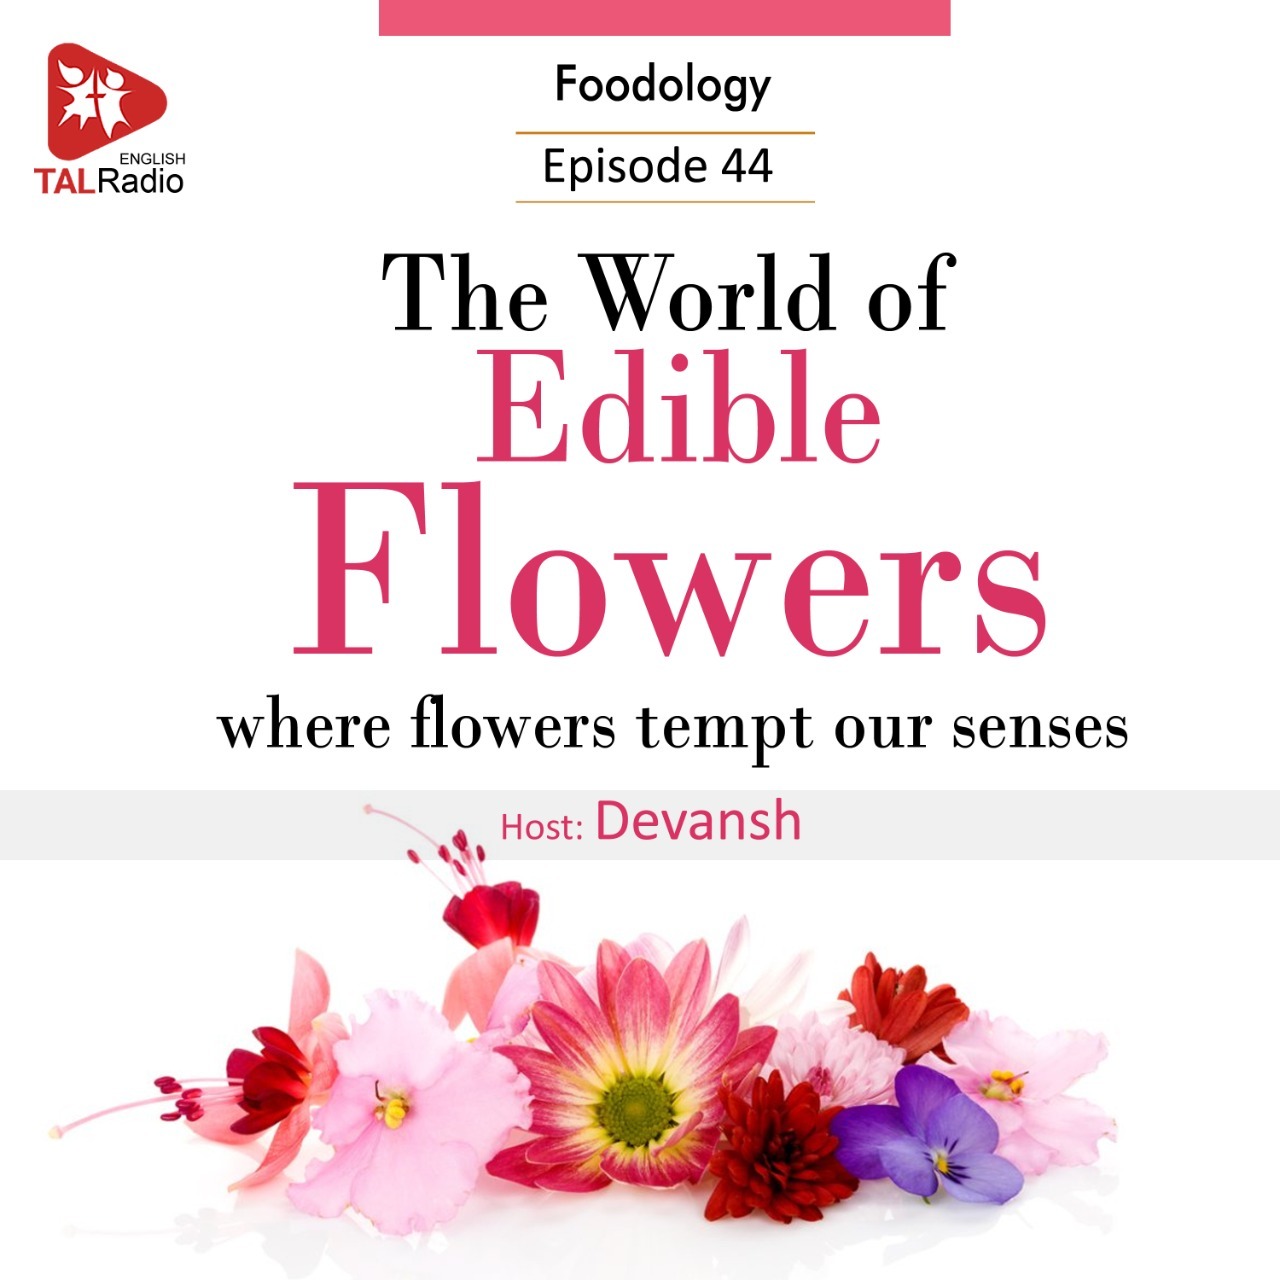 The World of Edible Flowers